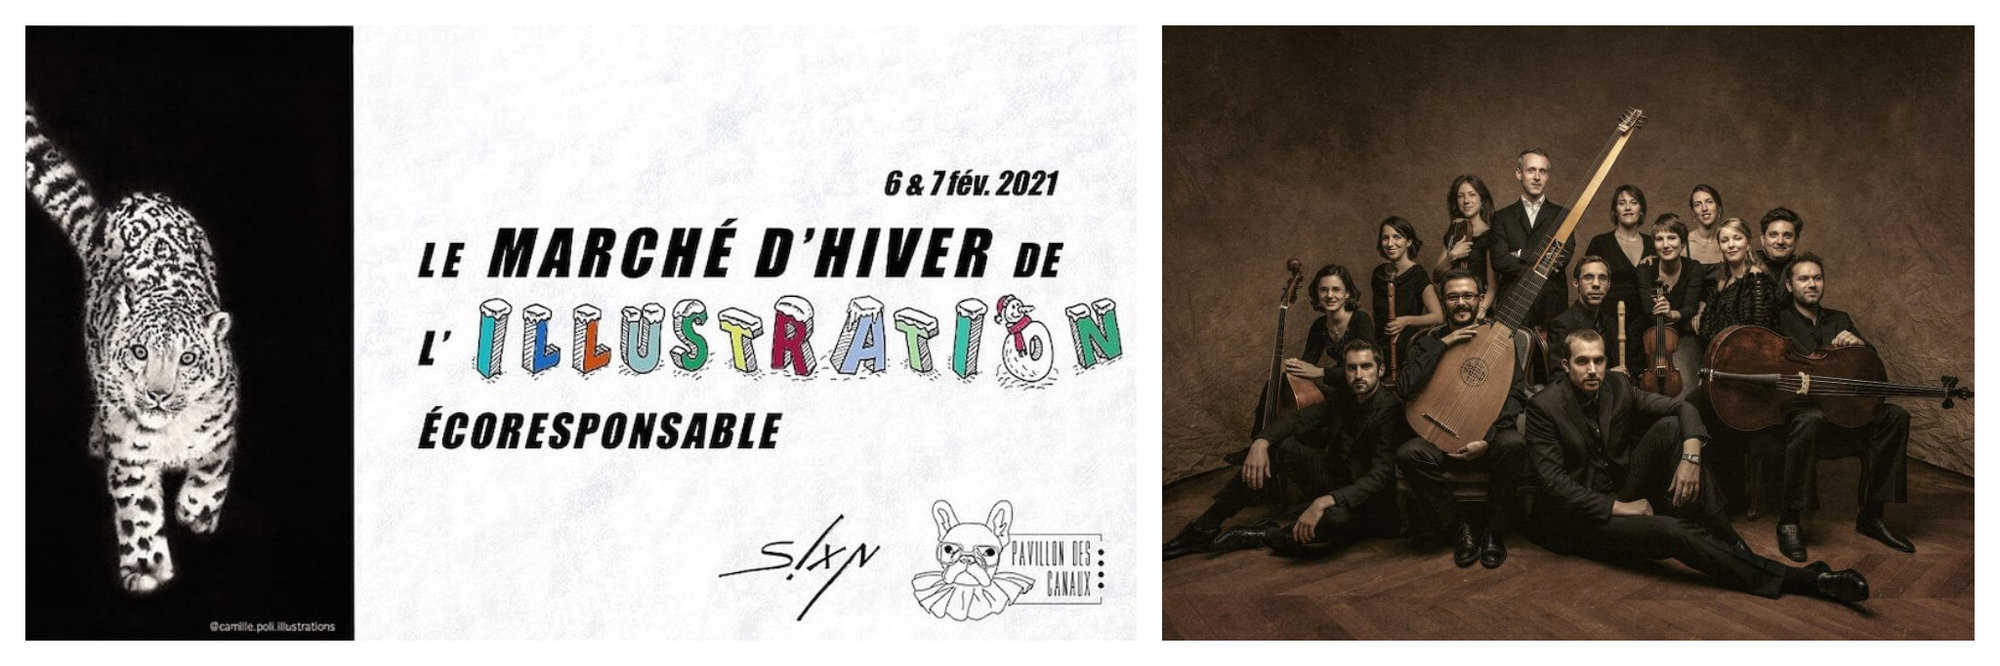 Left: The poster for Le Marché d'Hiver de l'Illustration Écoresponsable with an illustration of a white tiger on the left. Right: Sebastian Daucé, the conductor, and his ensemble of musicians pose for a photo with their musical instruments.